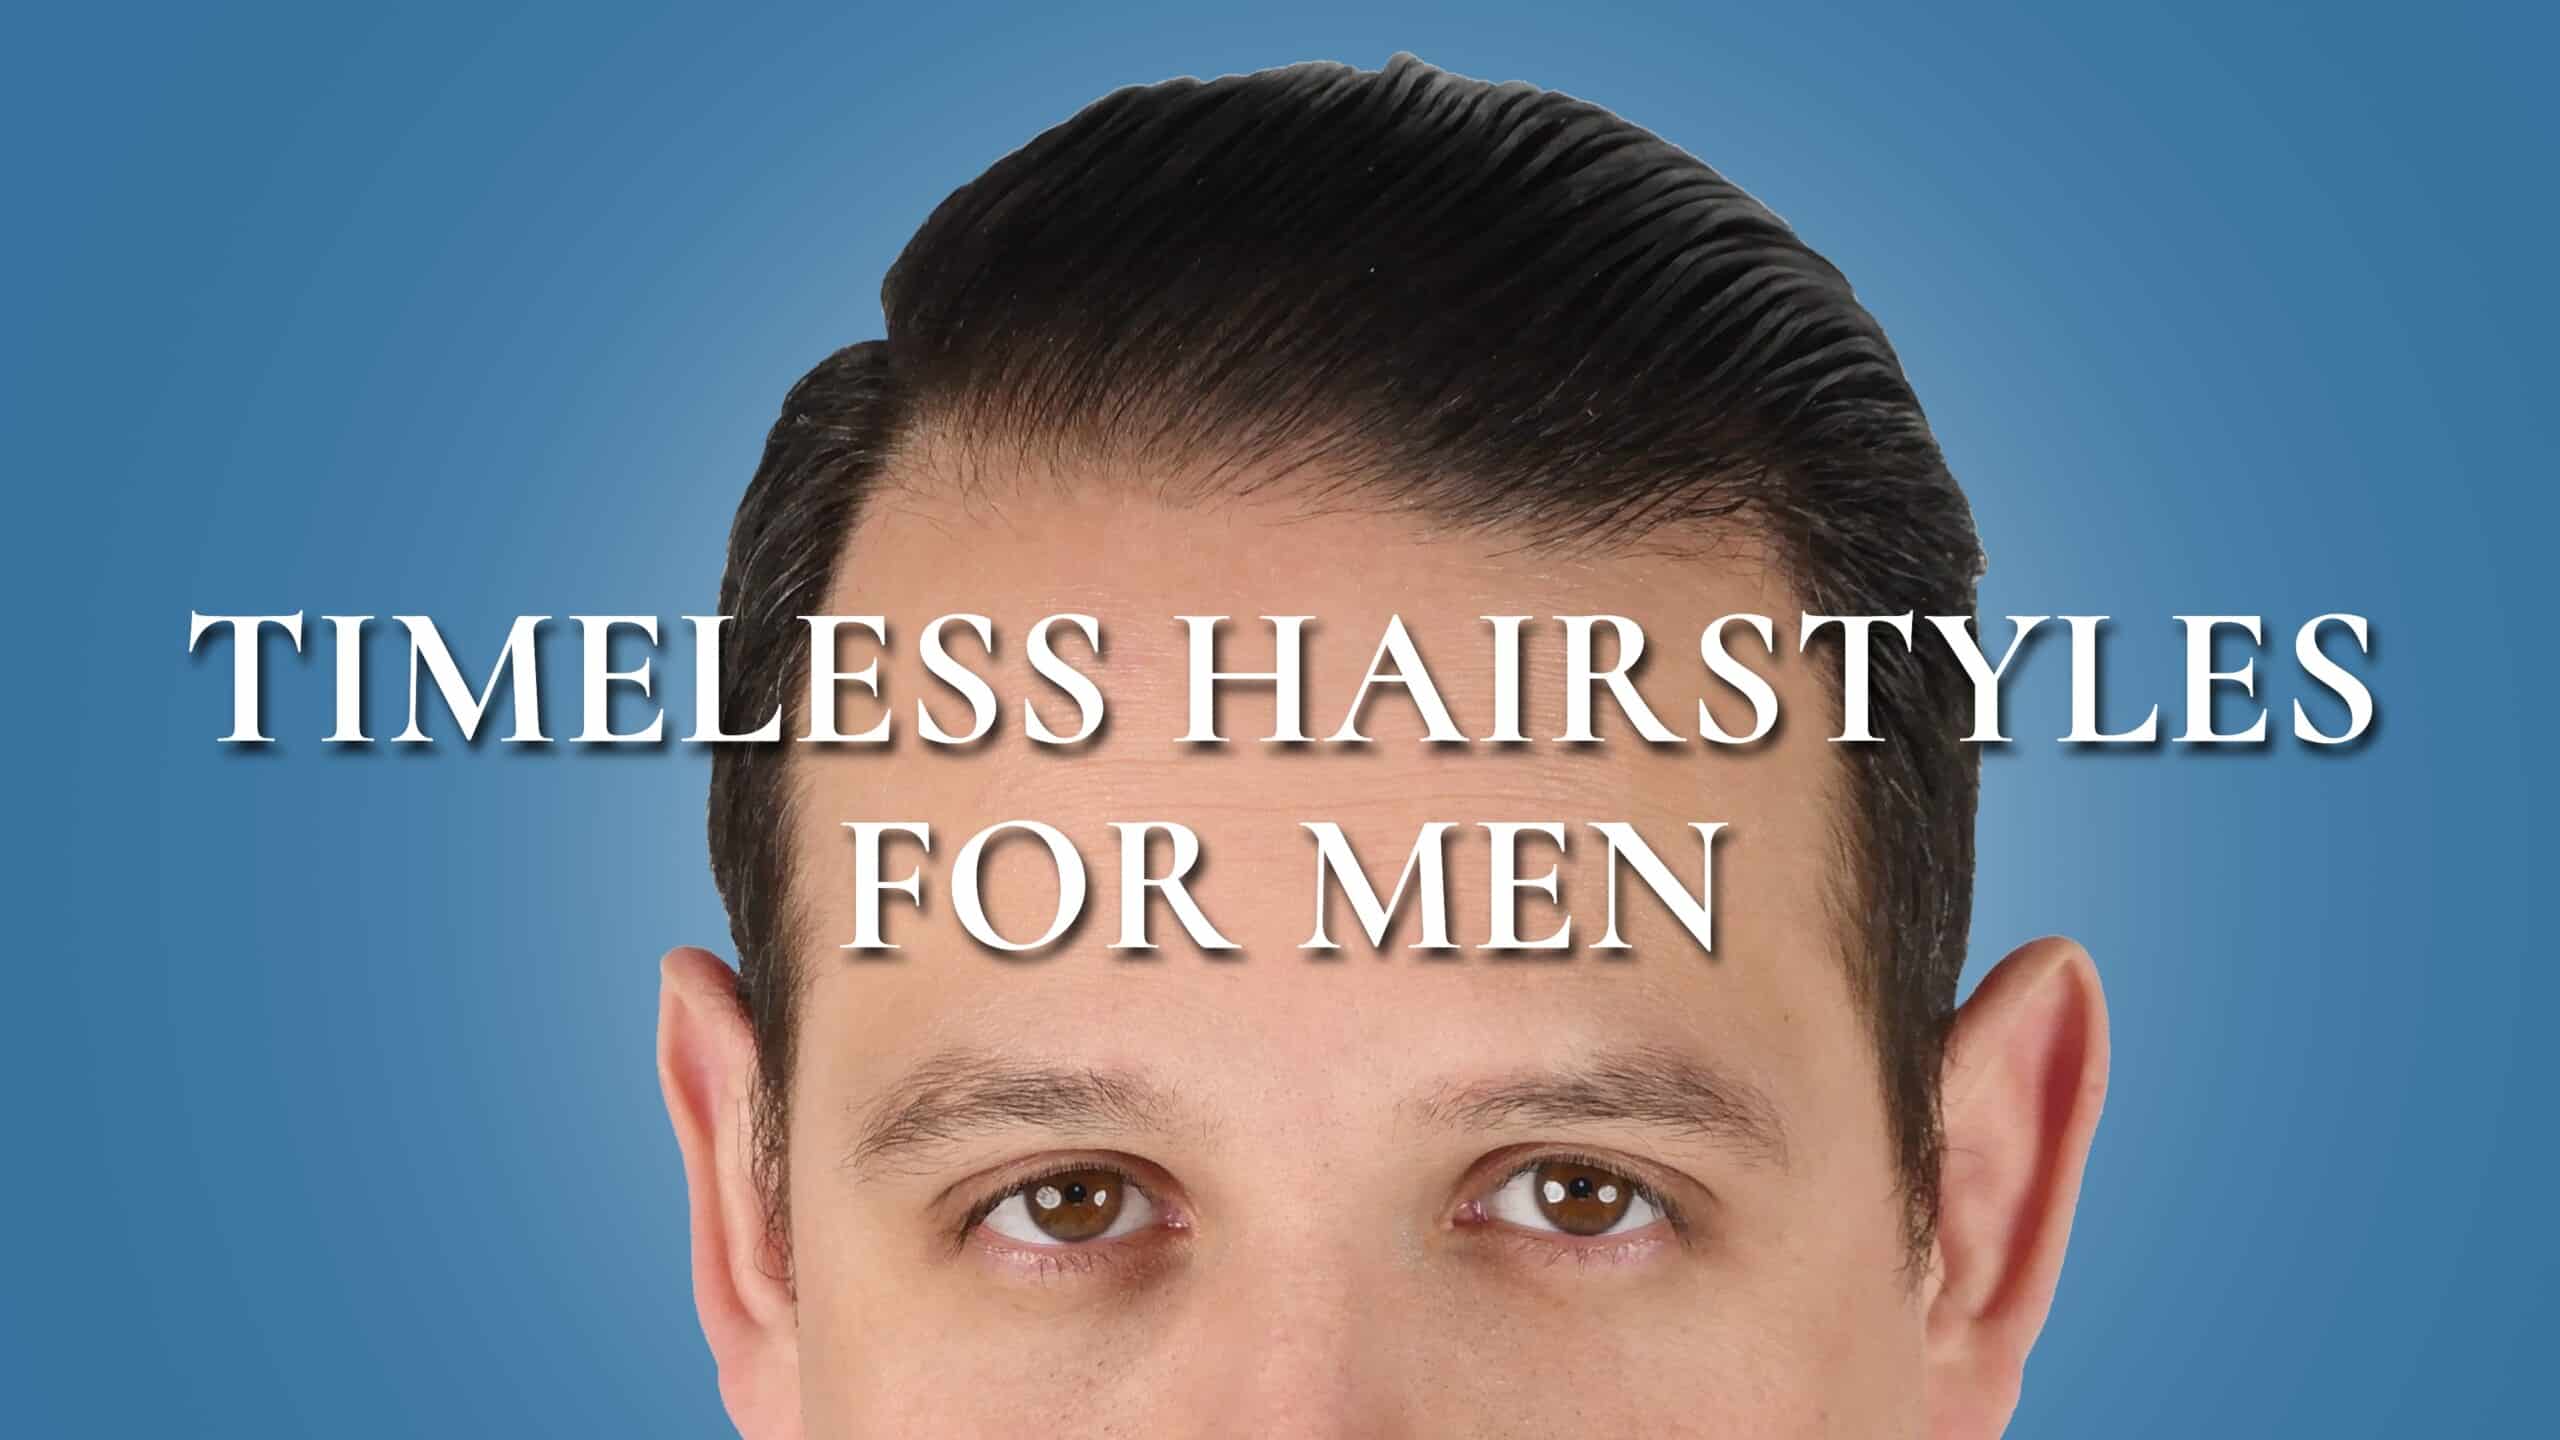 6 Classic Men's Hairstyles That Will Never Get Old - The Trend Spotter